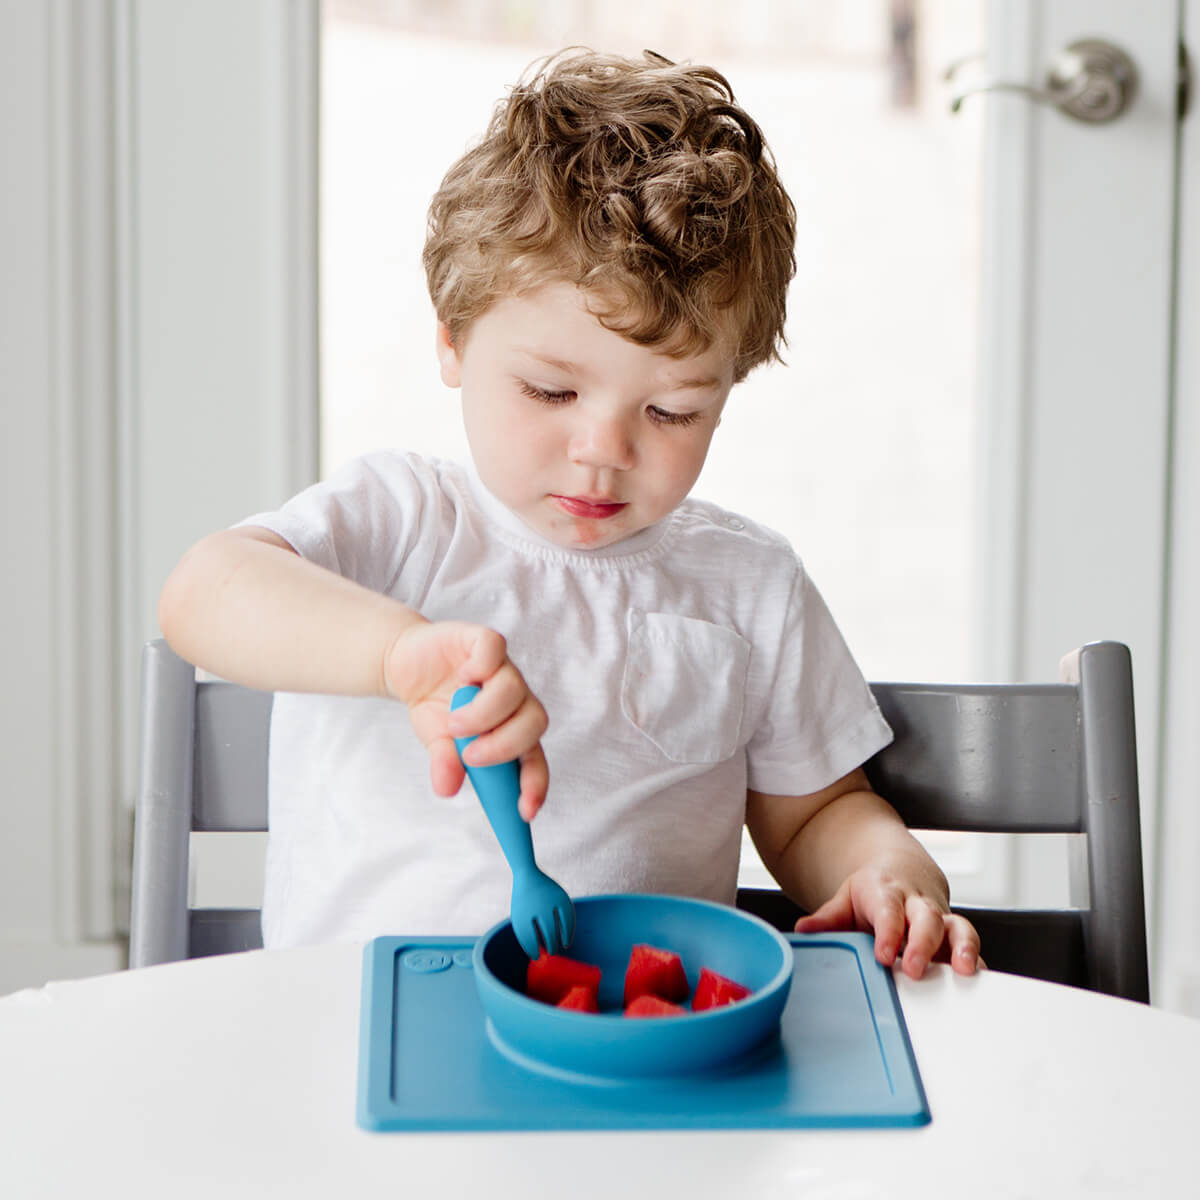 Mini Utensils in Blue by ezpz / Sensory Silicone Fork & Spoon for Toddlers